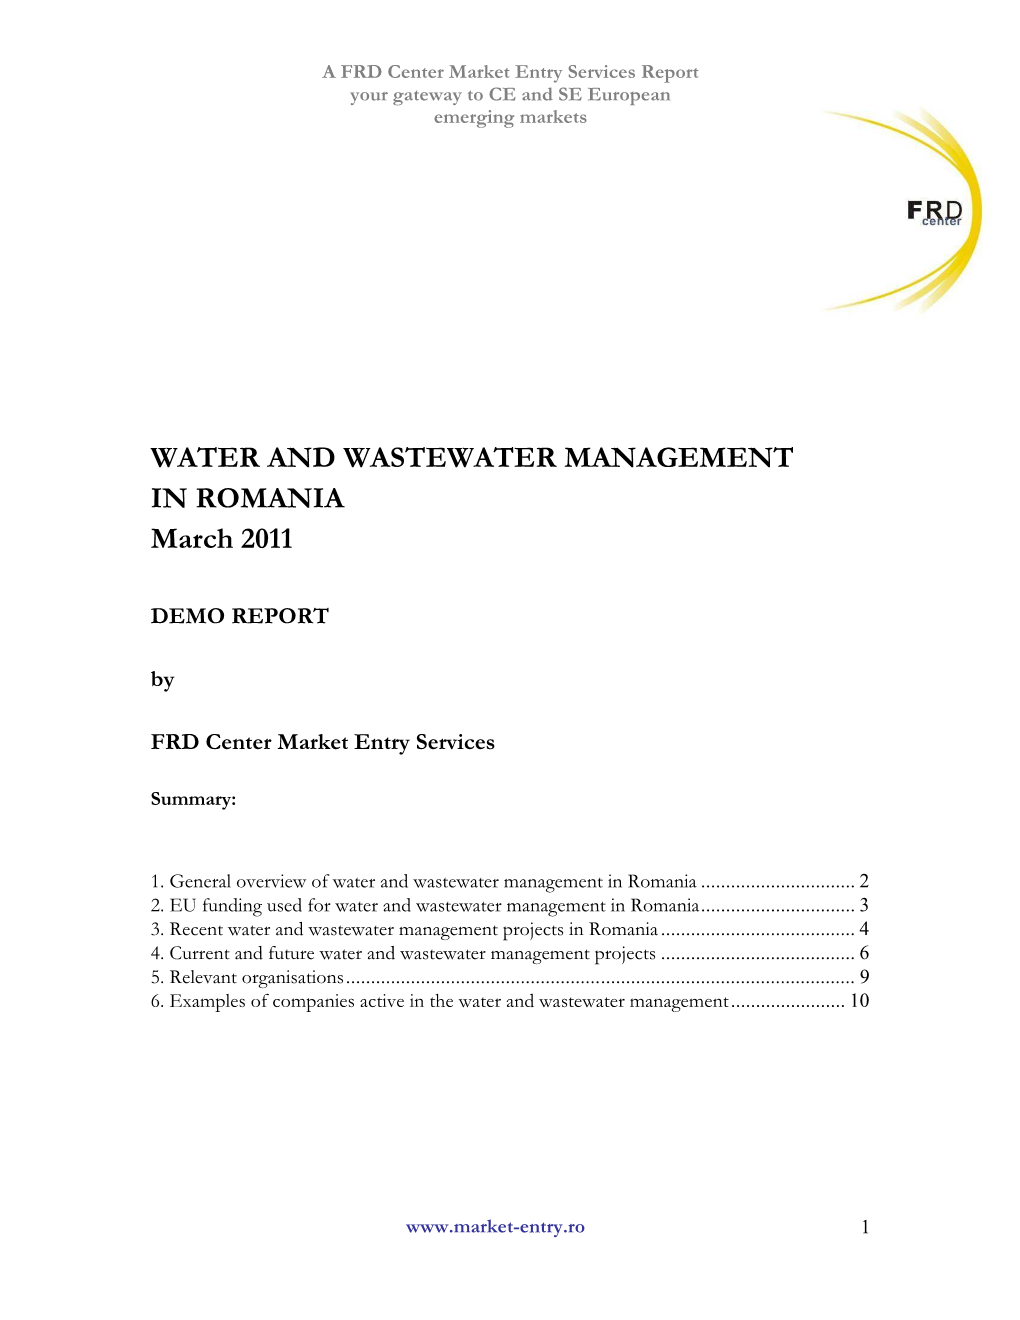 WATER and WASTEWATER MANAGEMENT in ROMANIA March 2011